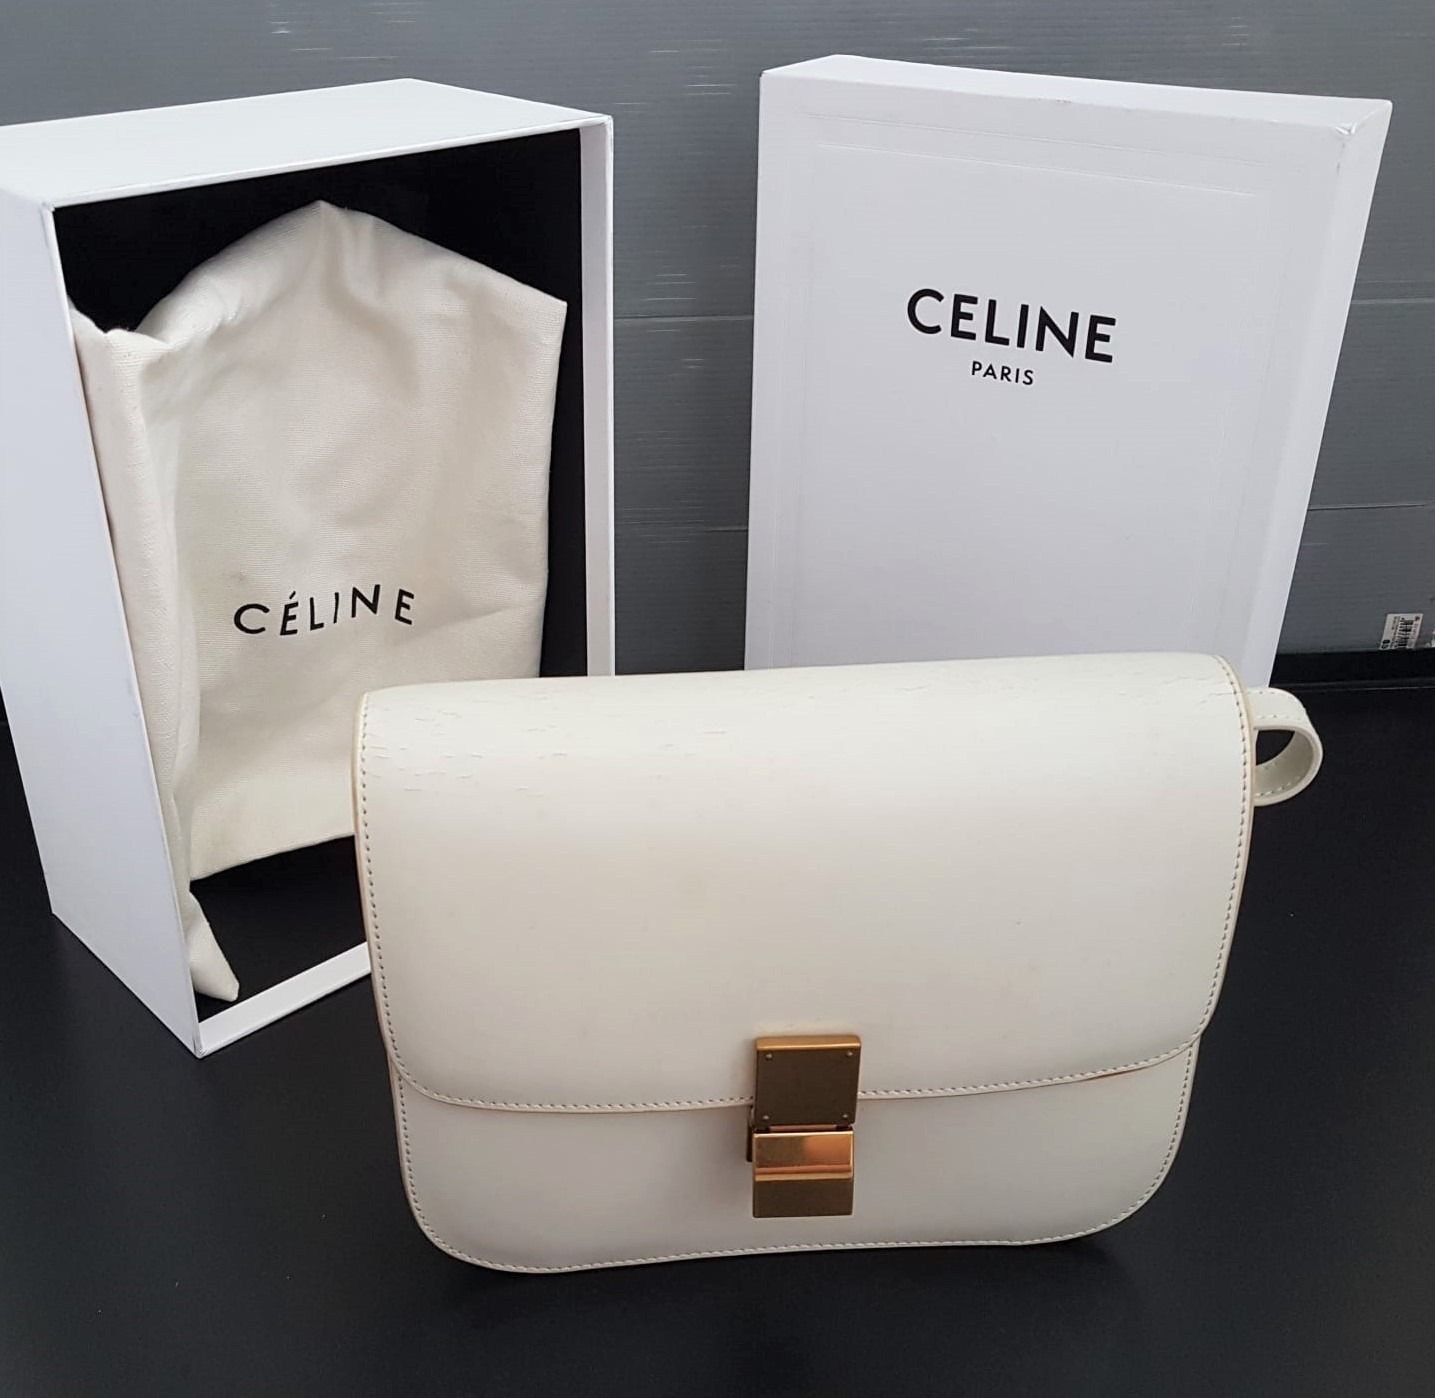 In-Vogue Celine Box Flap Bag, Paris, FRANCE, Pearl Colour, Luxury  Accessories, Made in ITALY, Shoulder Bag, Sling Bag, Cross Body, Size 9.5  by 8